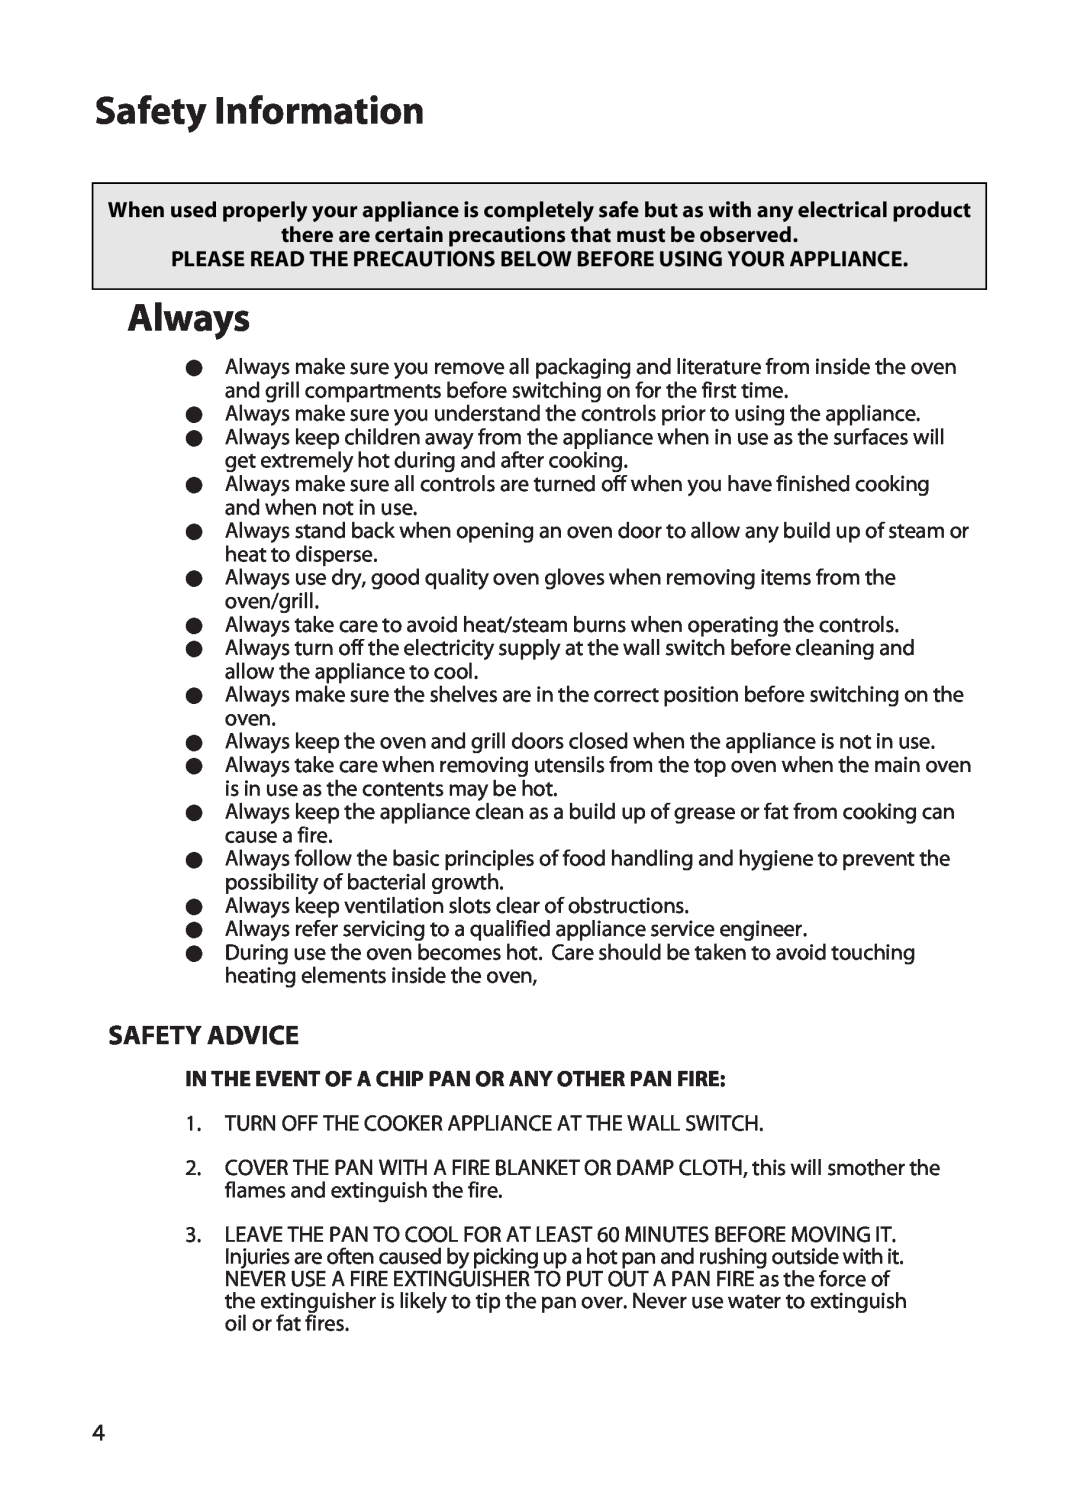 Hotpoint DD77 DT77 manual Safety Information, Always, Safety Advice, In The Event Of A Chip Pan Or Any Other Pan Fire 